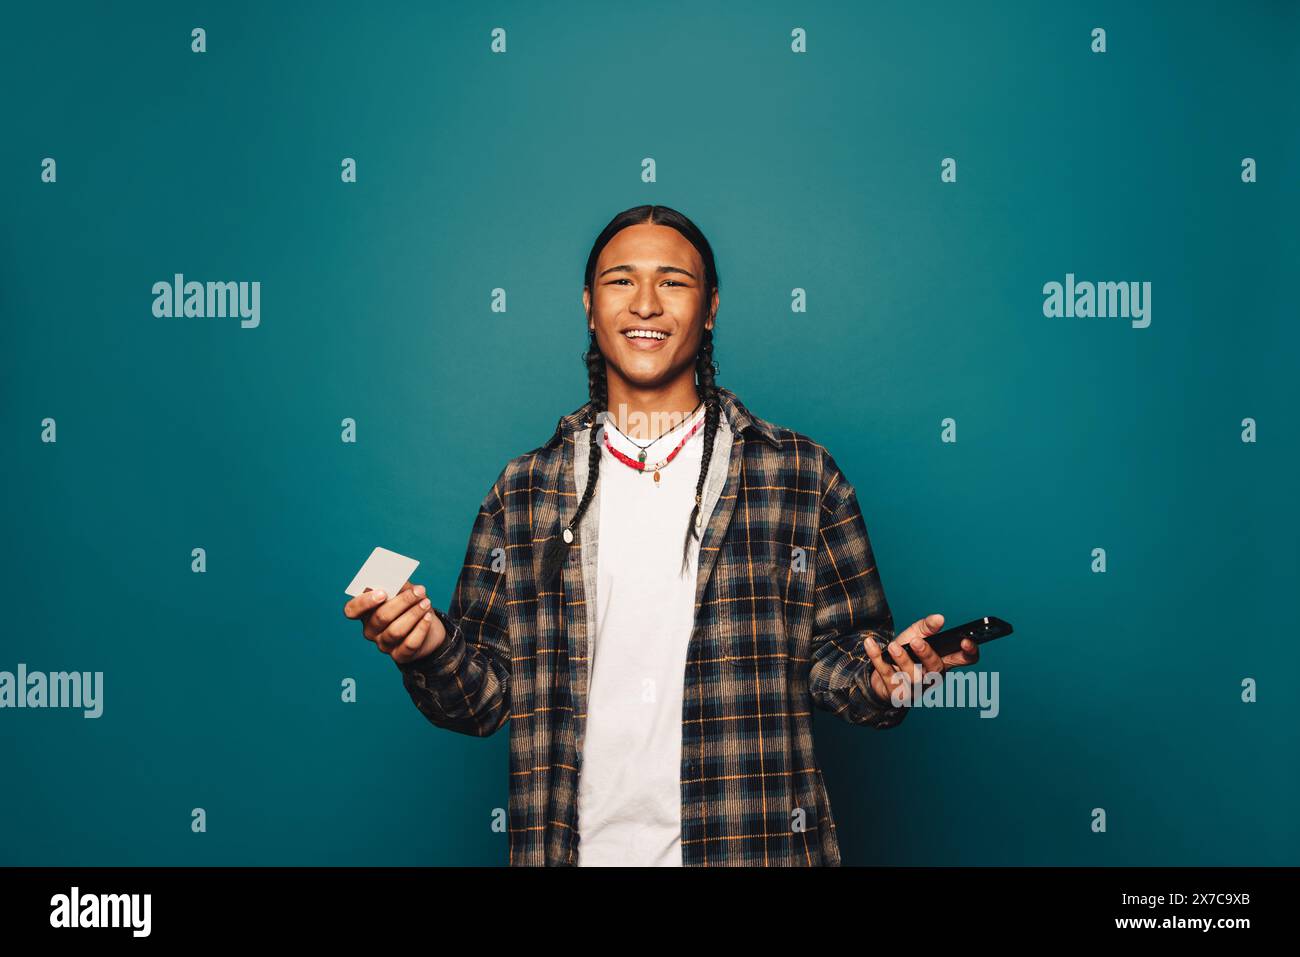 Cheerful, stylish person with braided hair stands against a blue background, holding a premium credit card and cellphone. Man representing the conveni Stock Photo